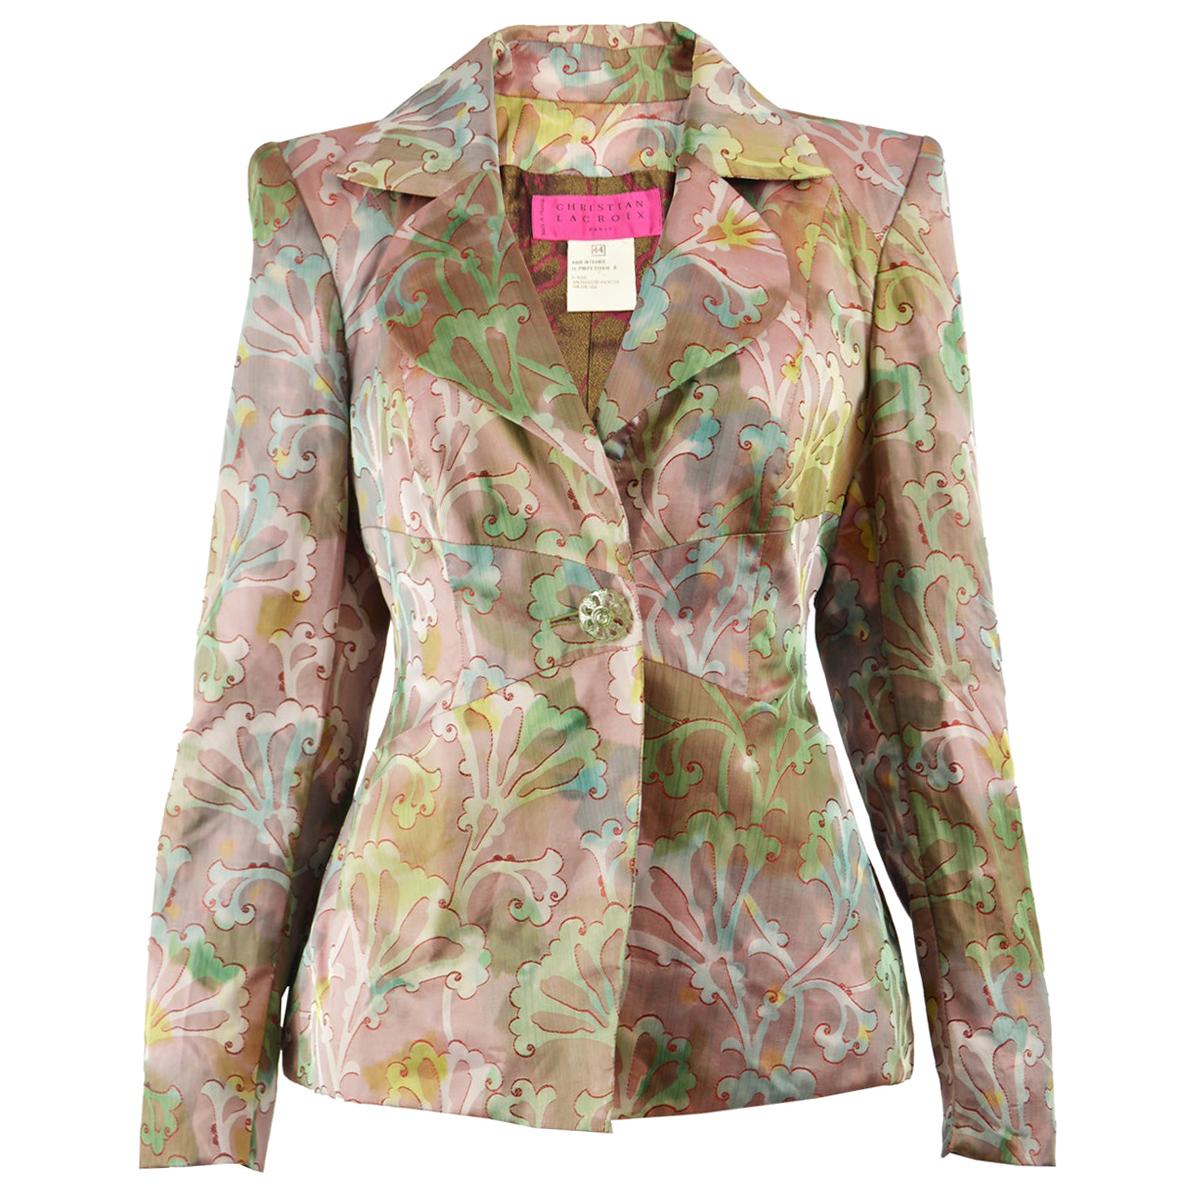 Christian Lacroix 1990s Multicolored Taffeta Tailored Evening Party Jacket For Sale